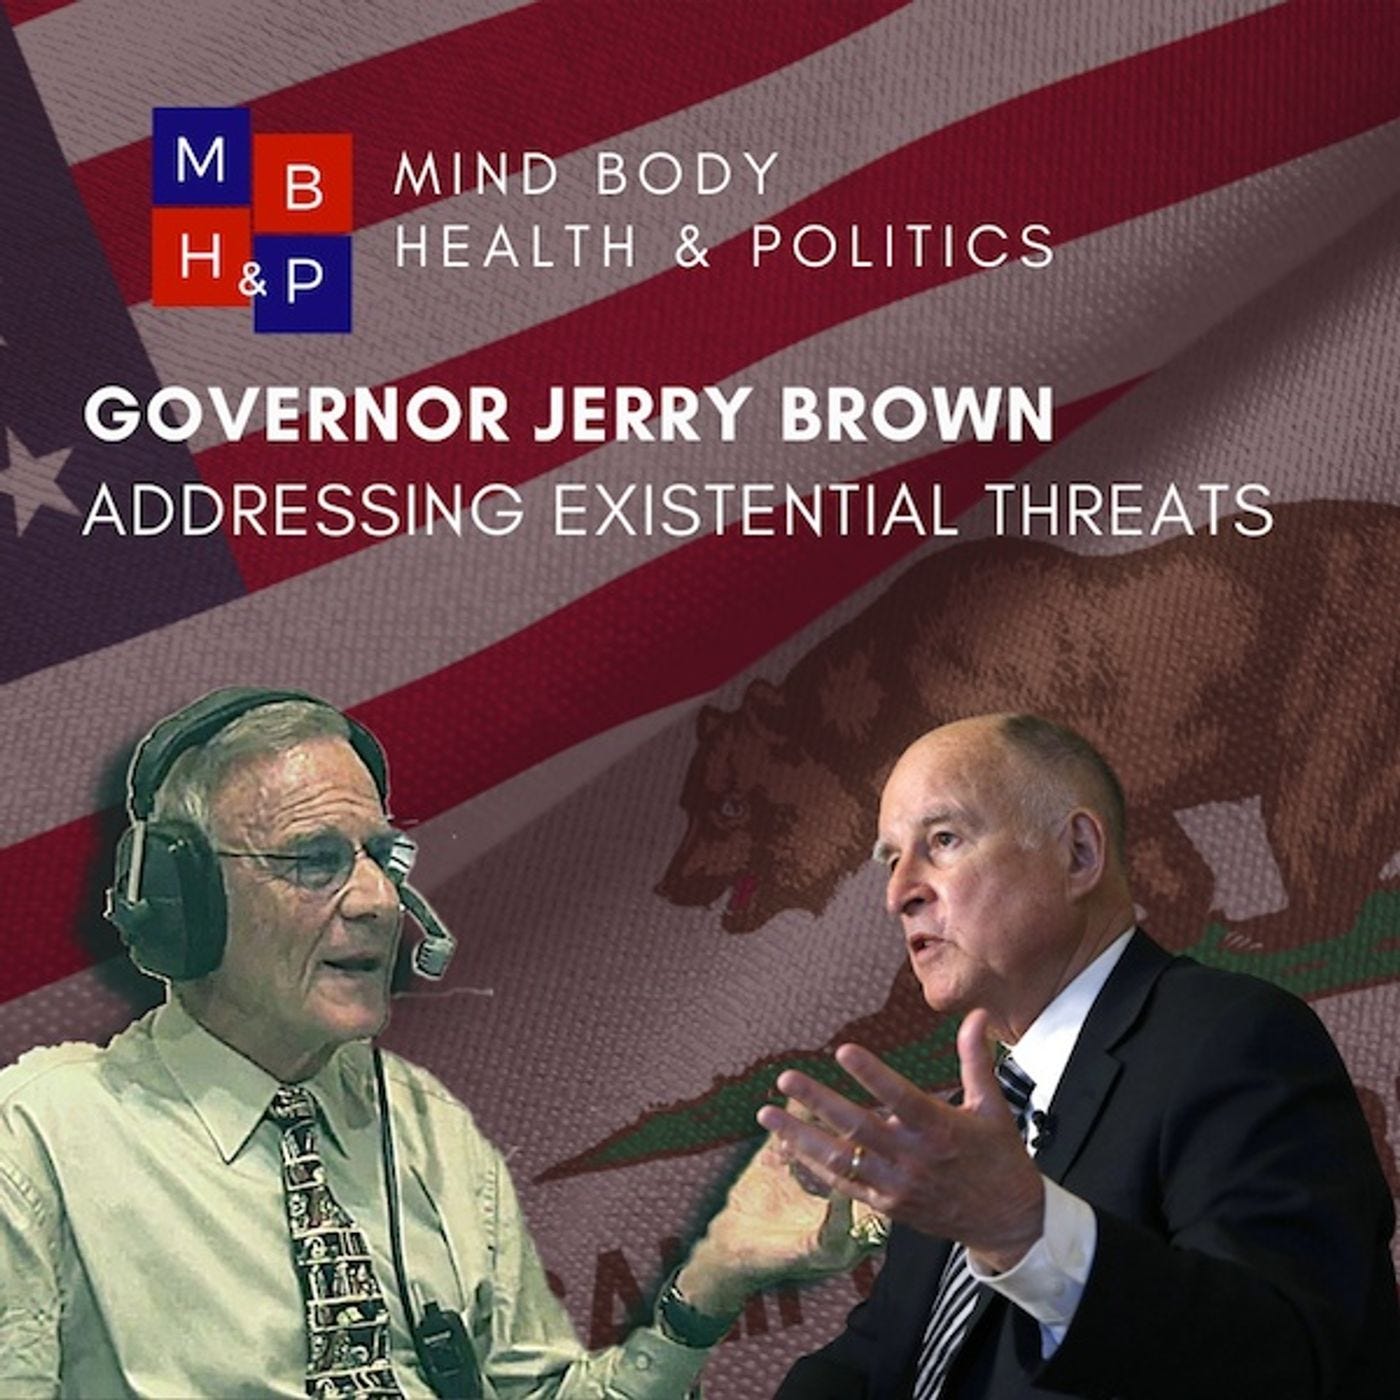 Governor Jerry Brown addresses existential threats in an era of political mistrust